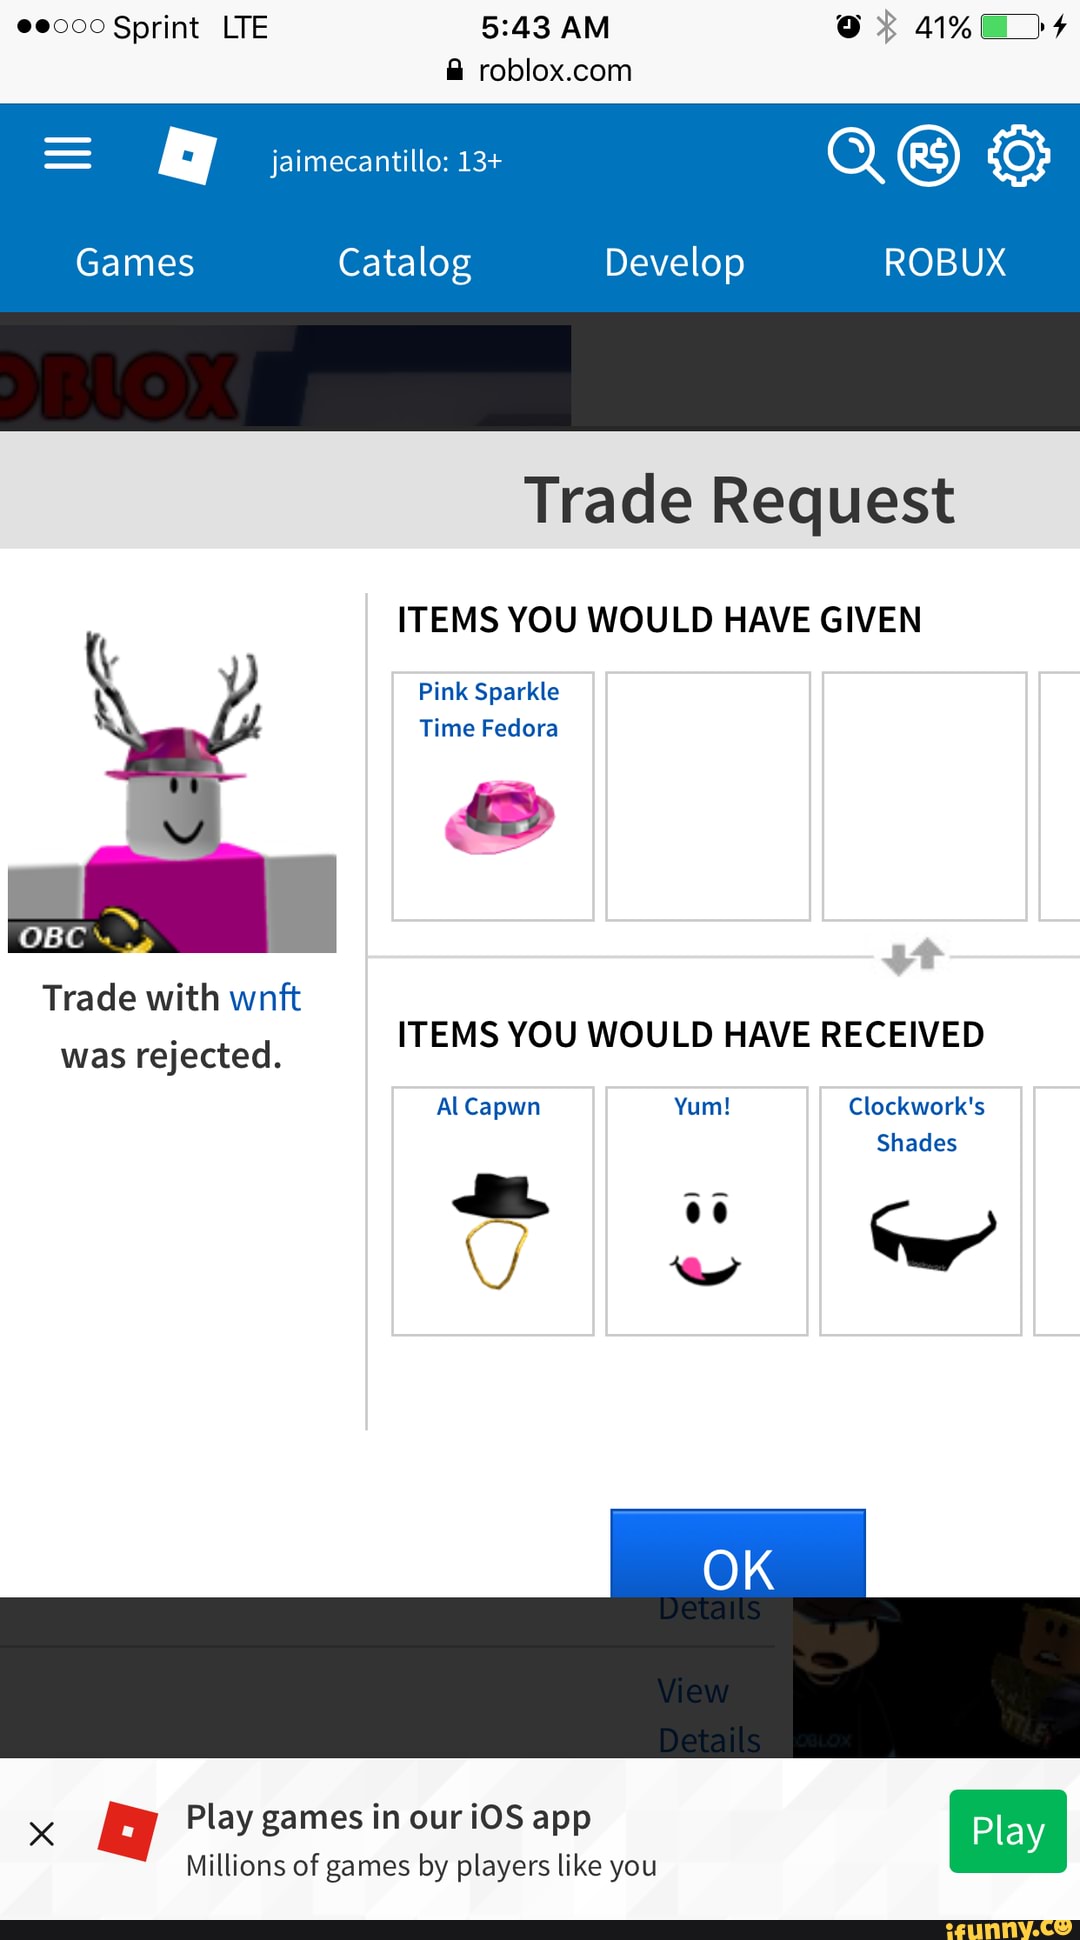 485k lost :( - Games Catalog Develop ROBUX Trade Request ITEMS YOU